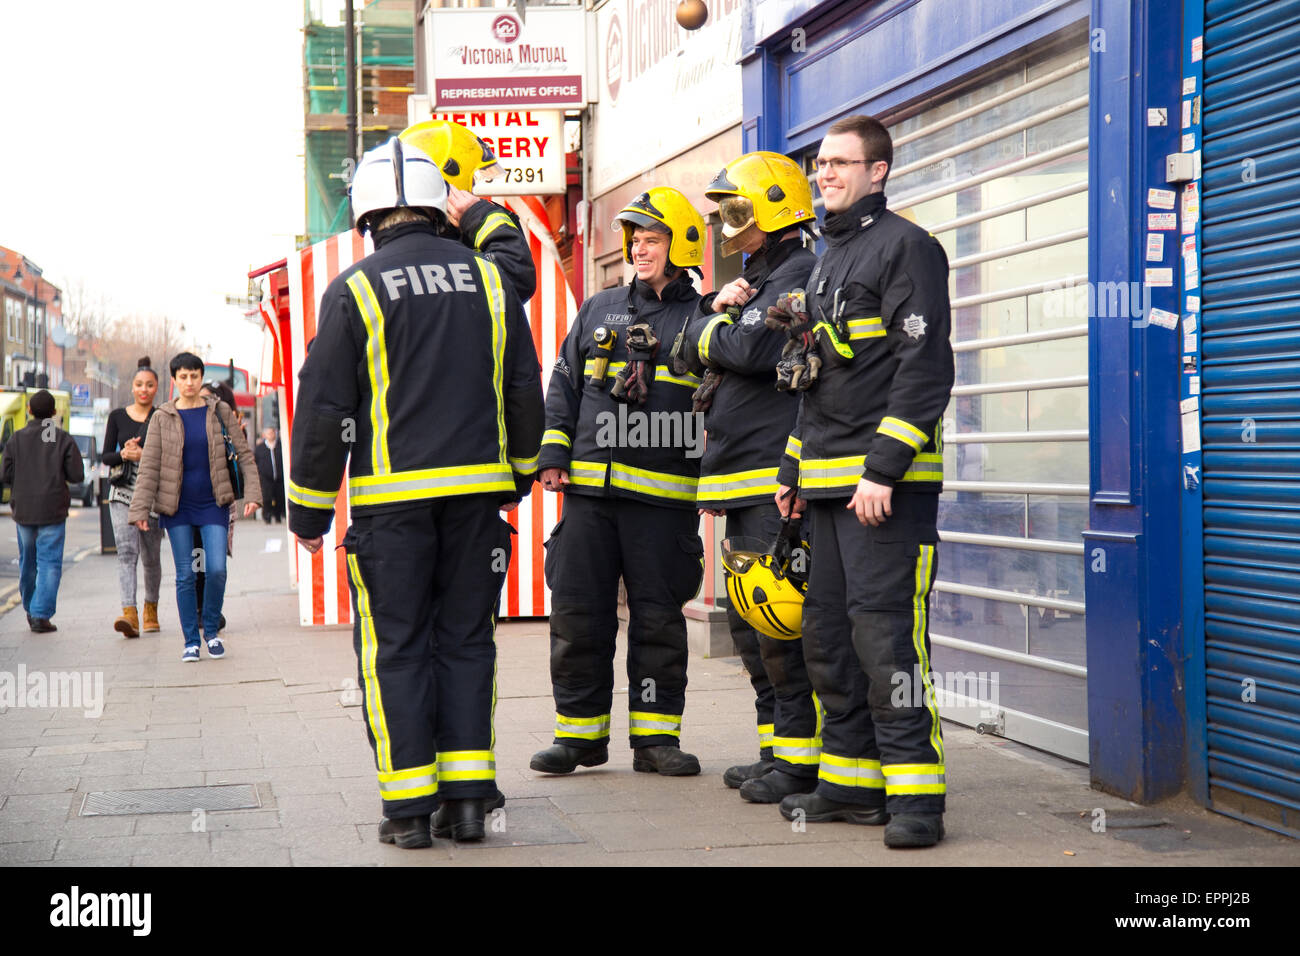 Firefighter uniform uk High Resolution Stock Photography and Images - Alamy